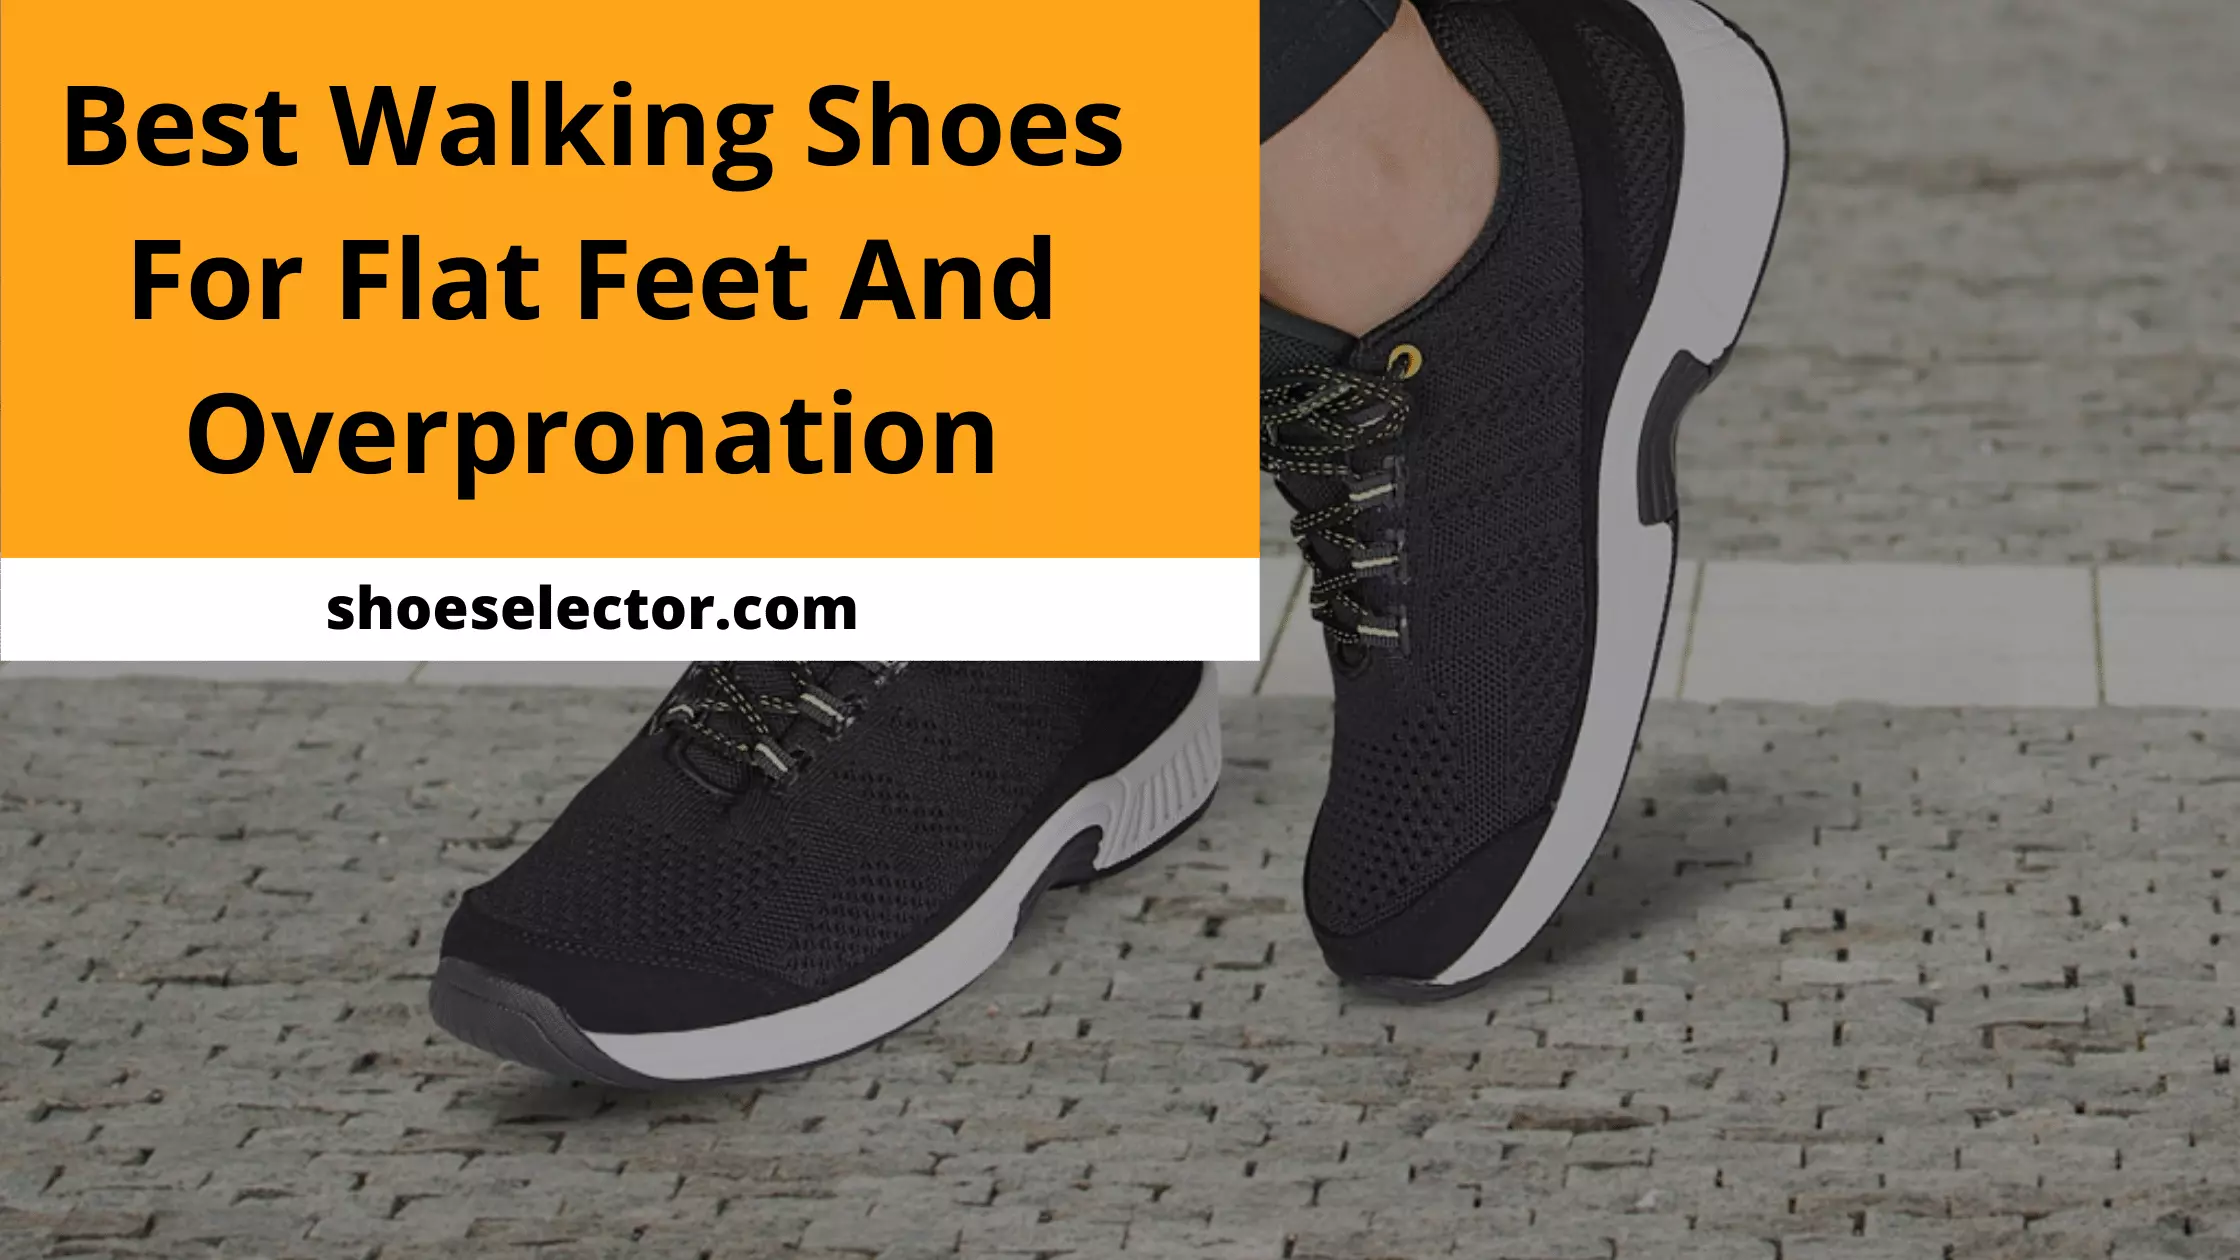 Best Walking Shoes For Flat Feet And Overpronation - Latest Guide